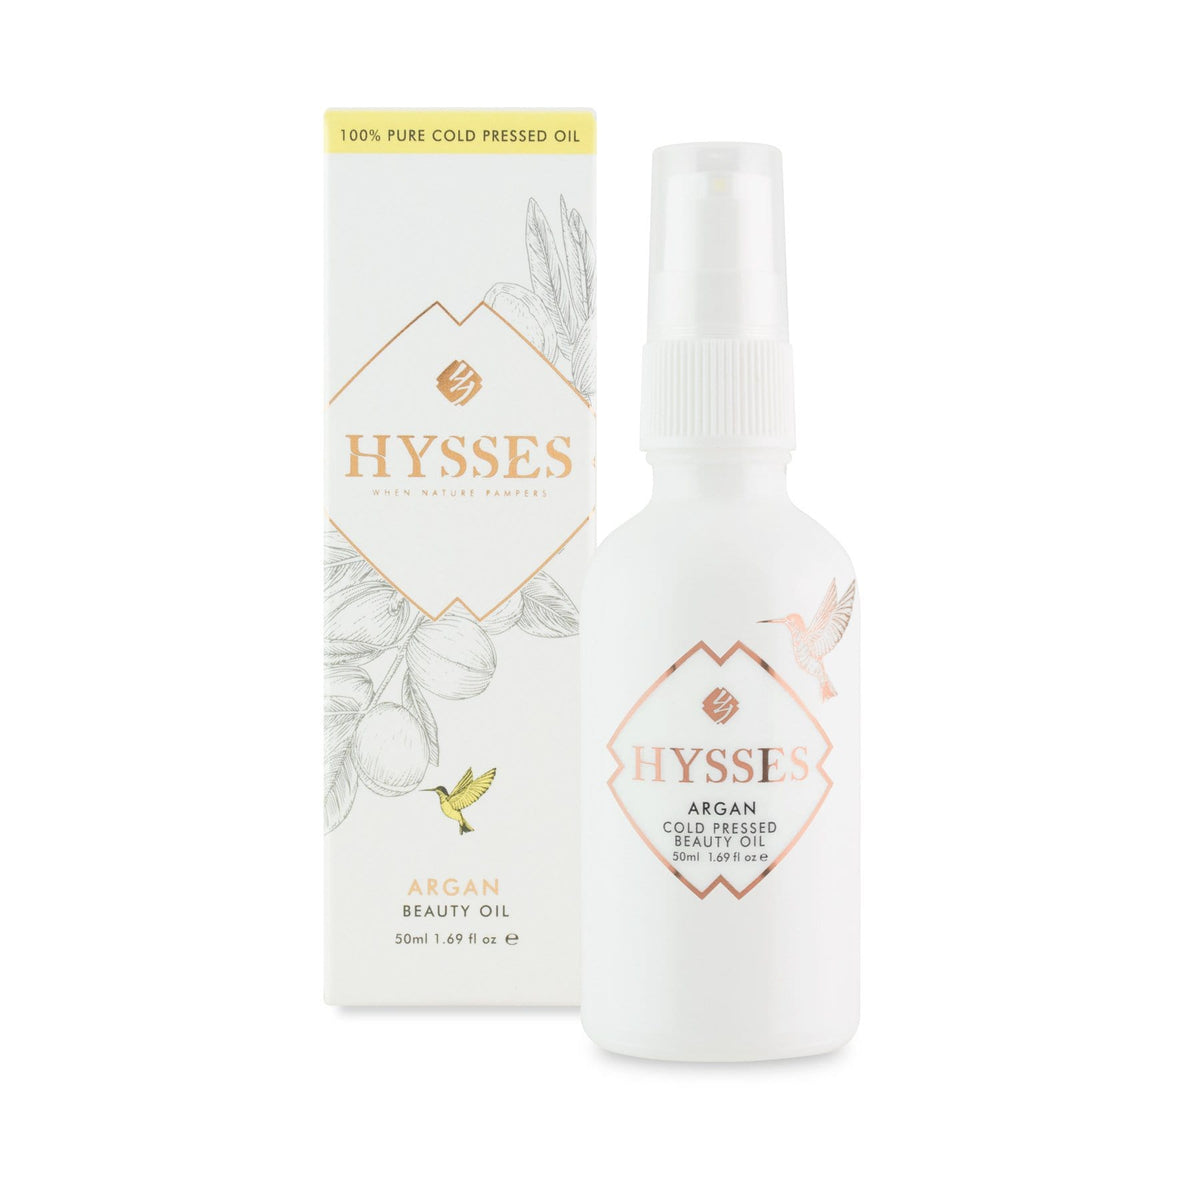 Hysses Face Care Cold Pressed Beauty Oil Argan